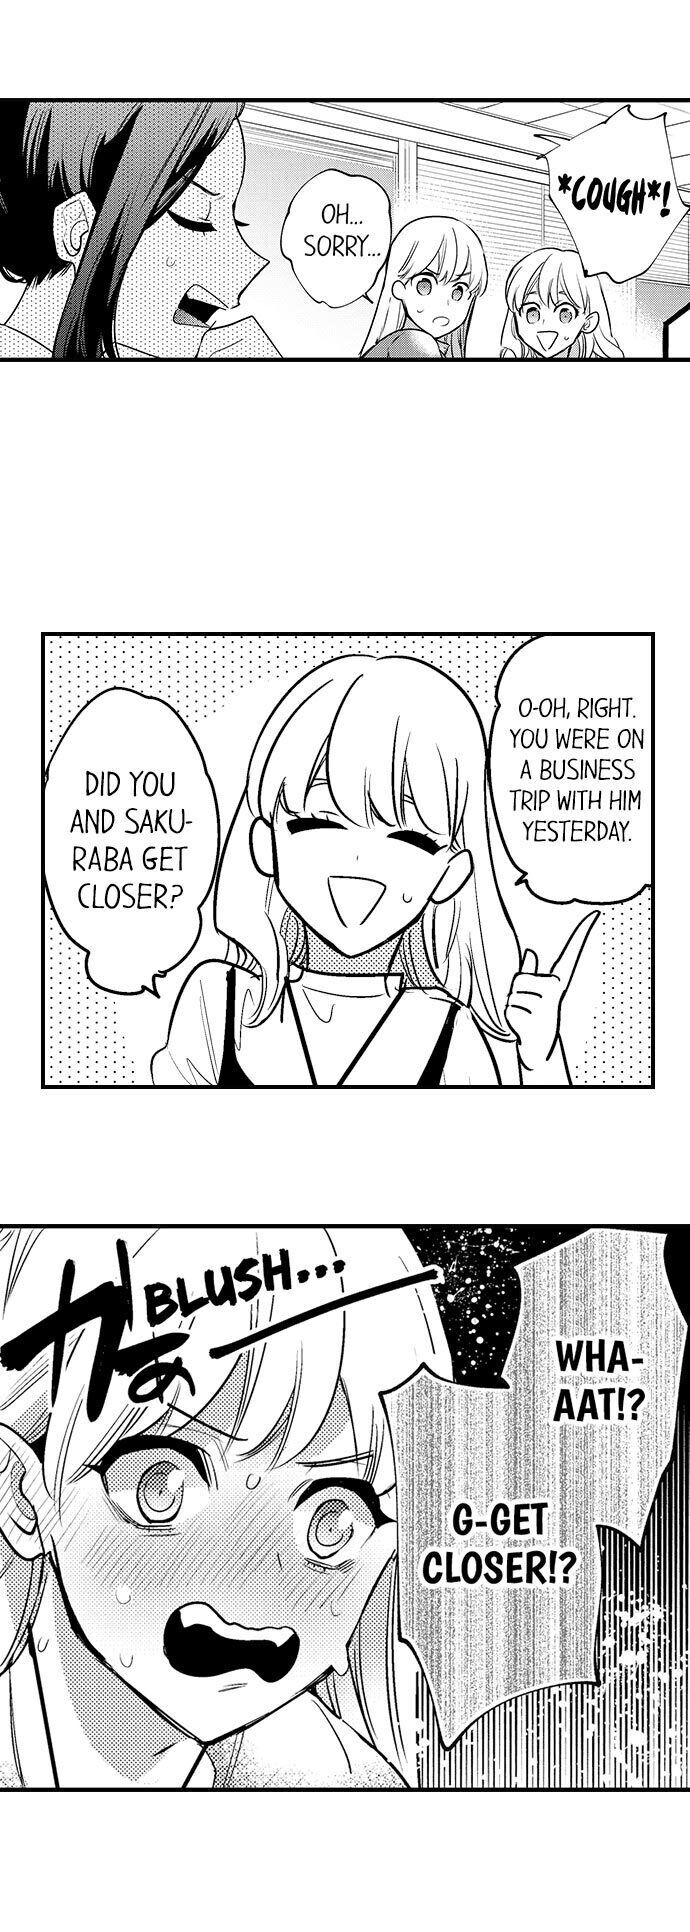 Busted: Sakuraba Is Obsessed With Sex - Chapter 5 Page 5